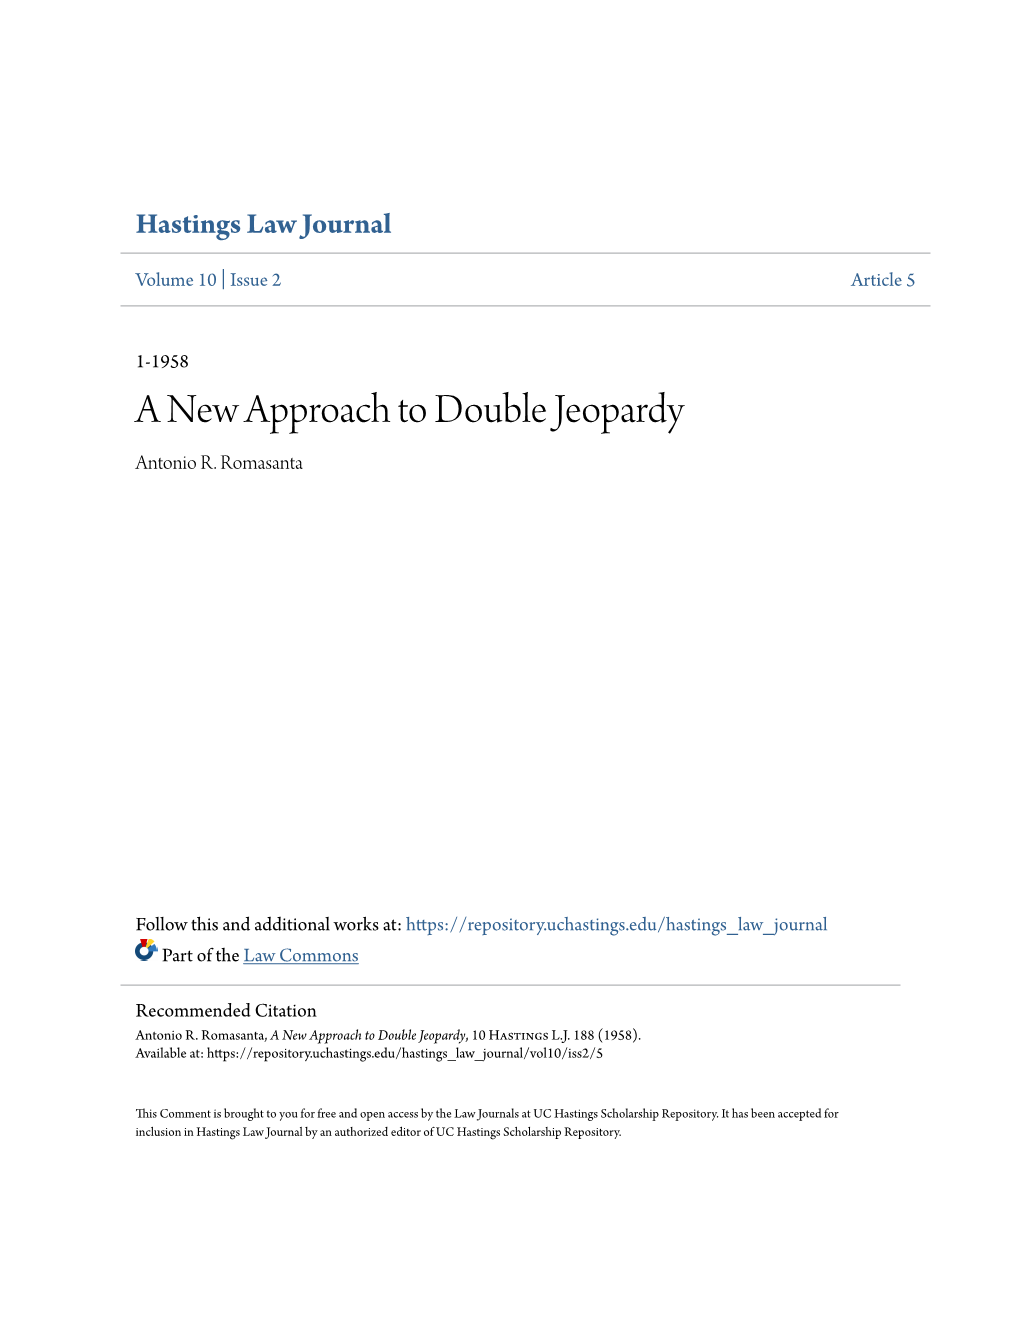 A New Approach to Double Jeopardy Antonio R